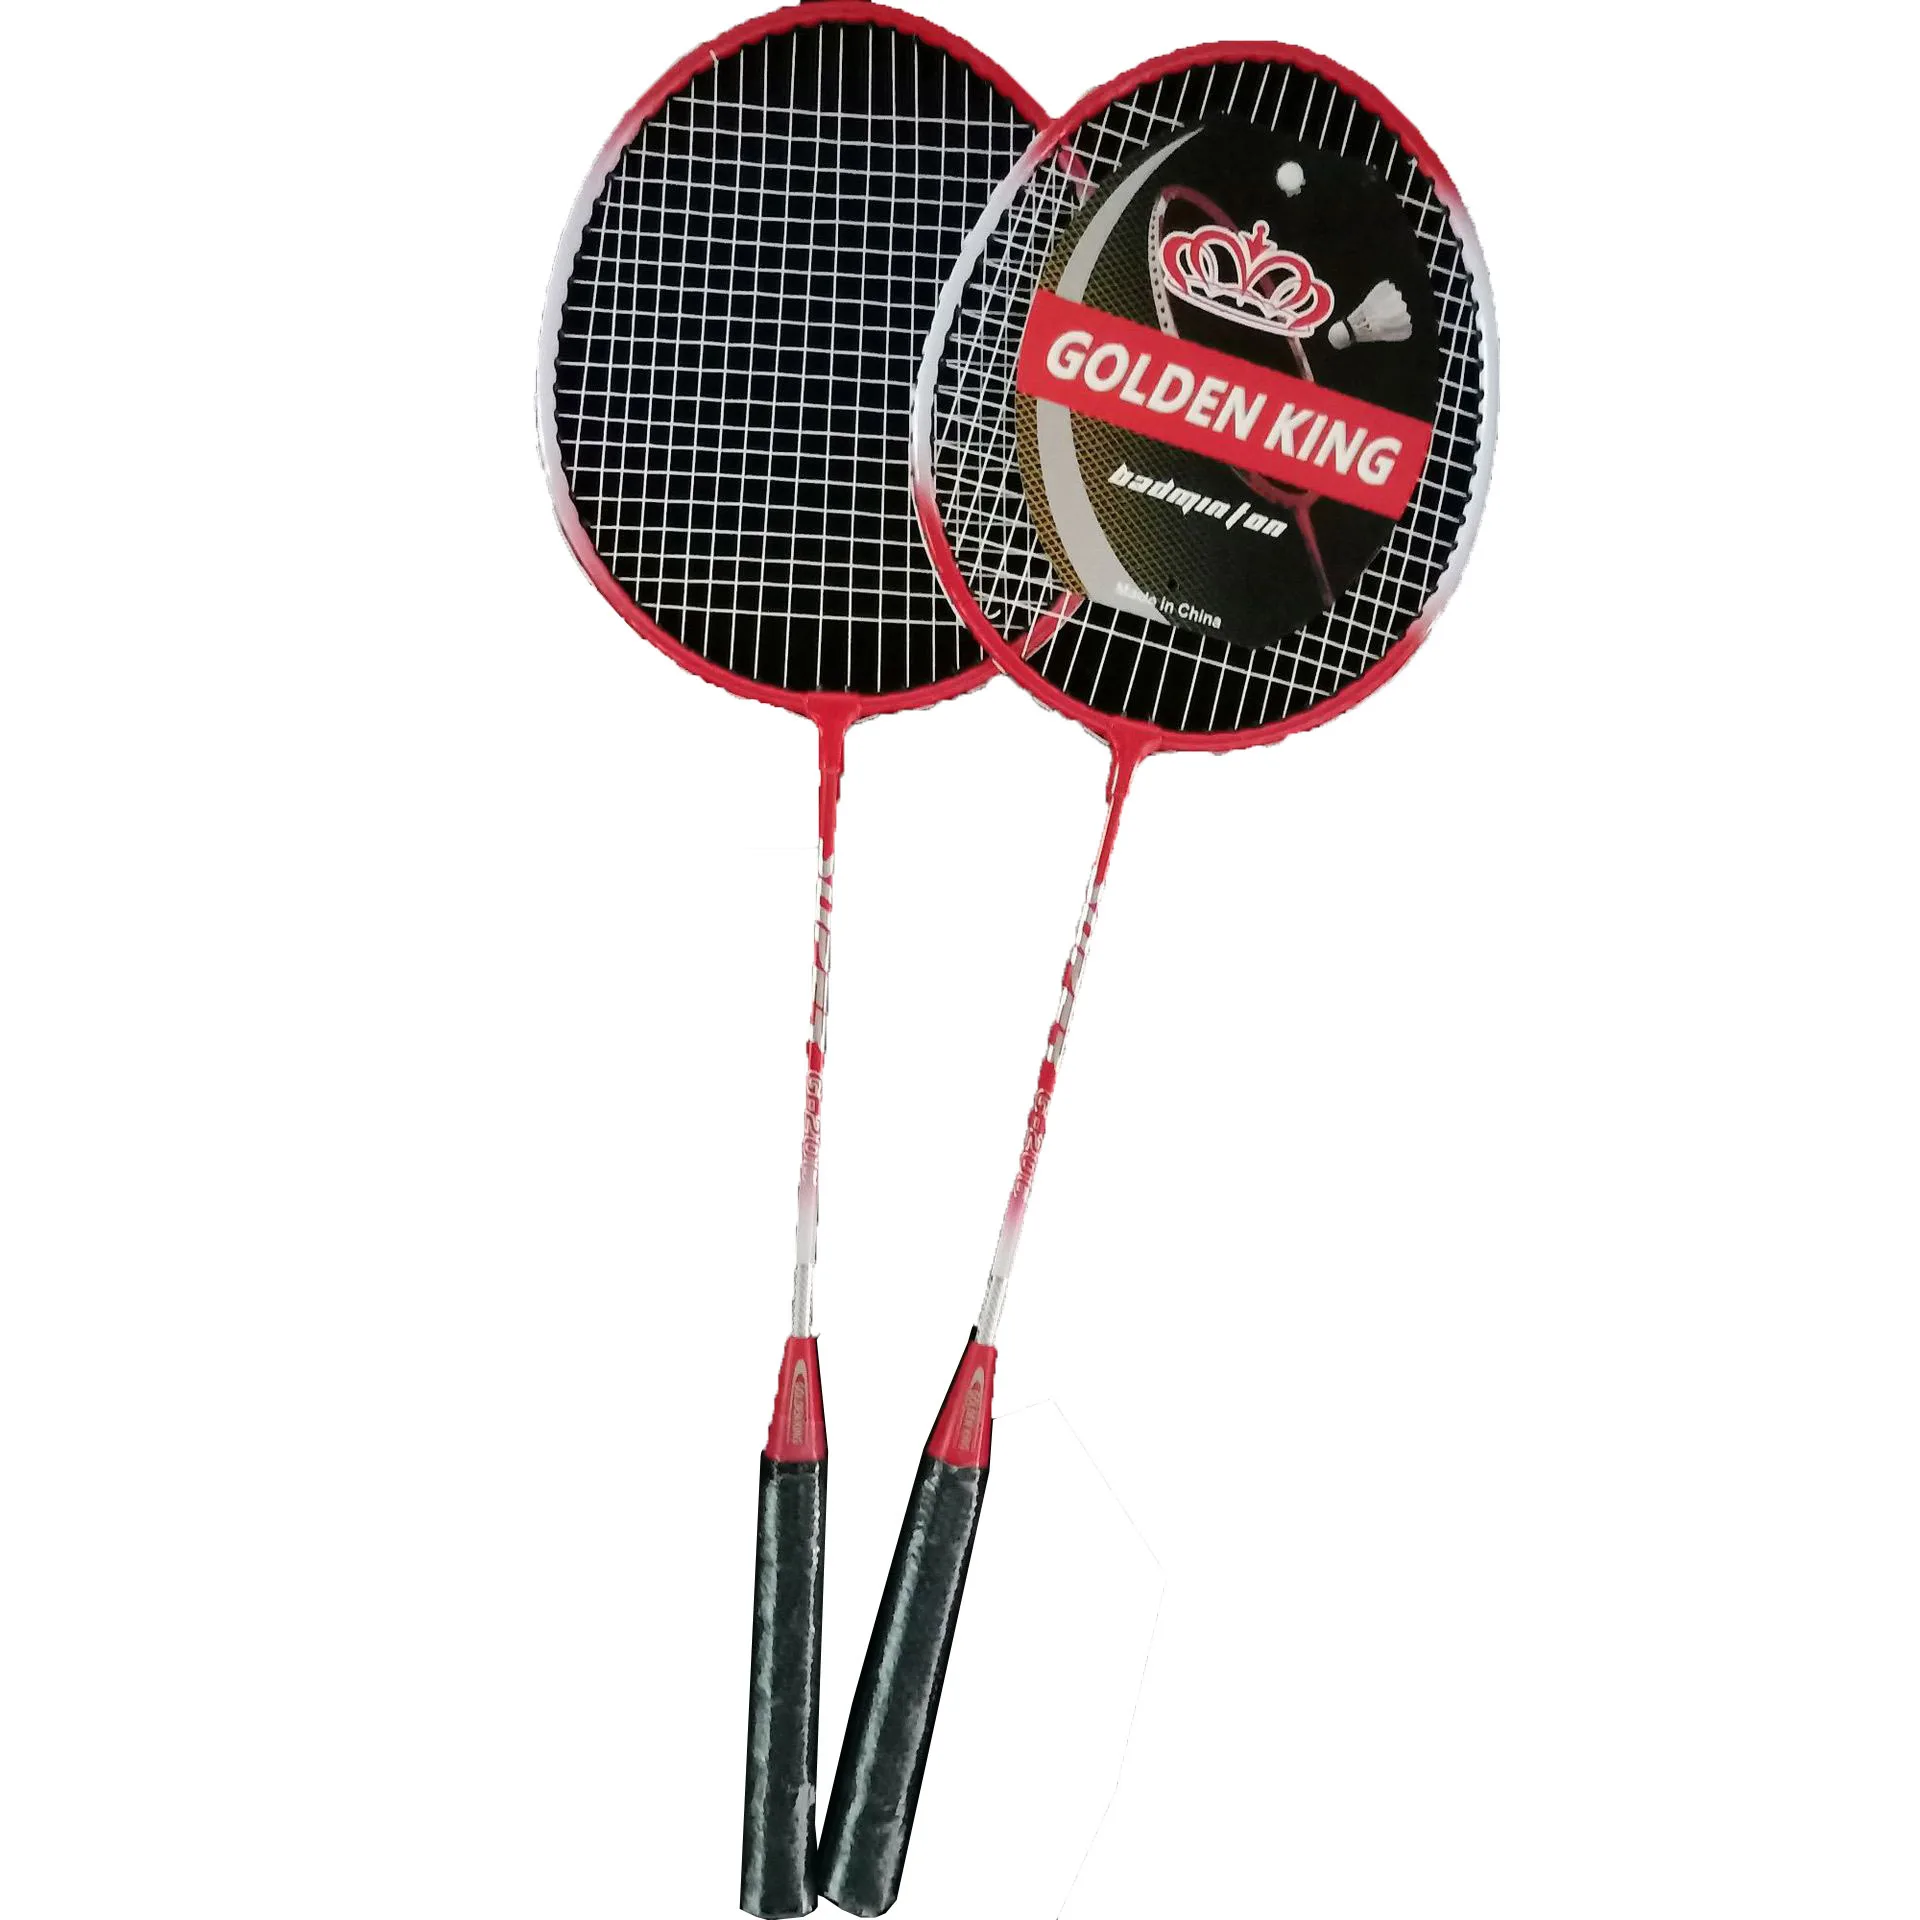 Wholesale prices professional top ranking products badminton racket From m.alibaba